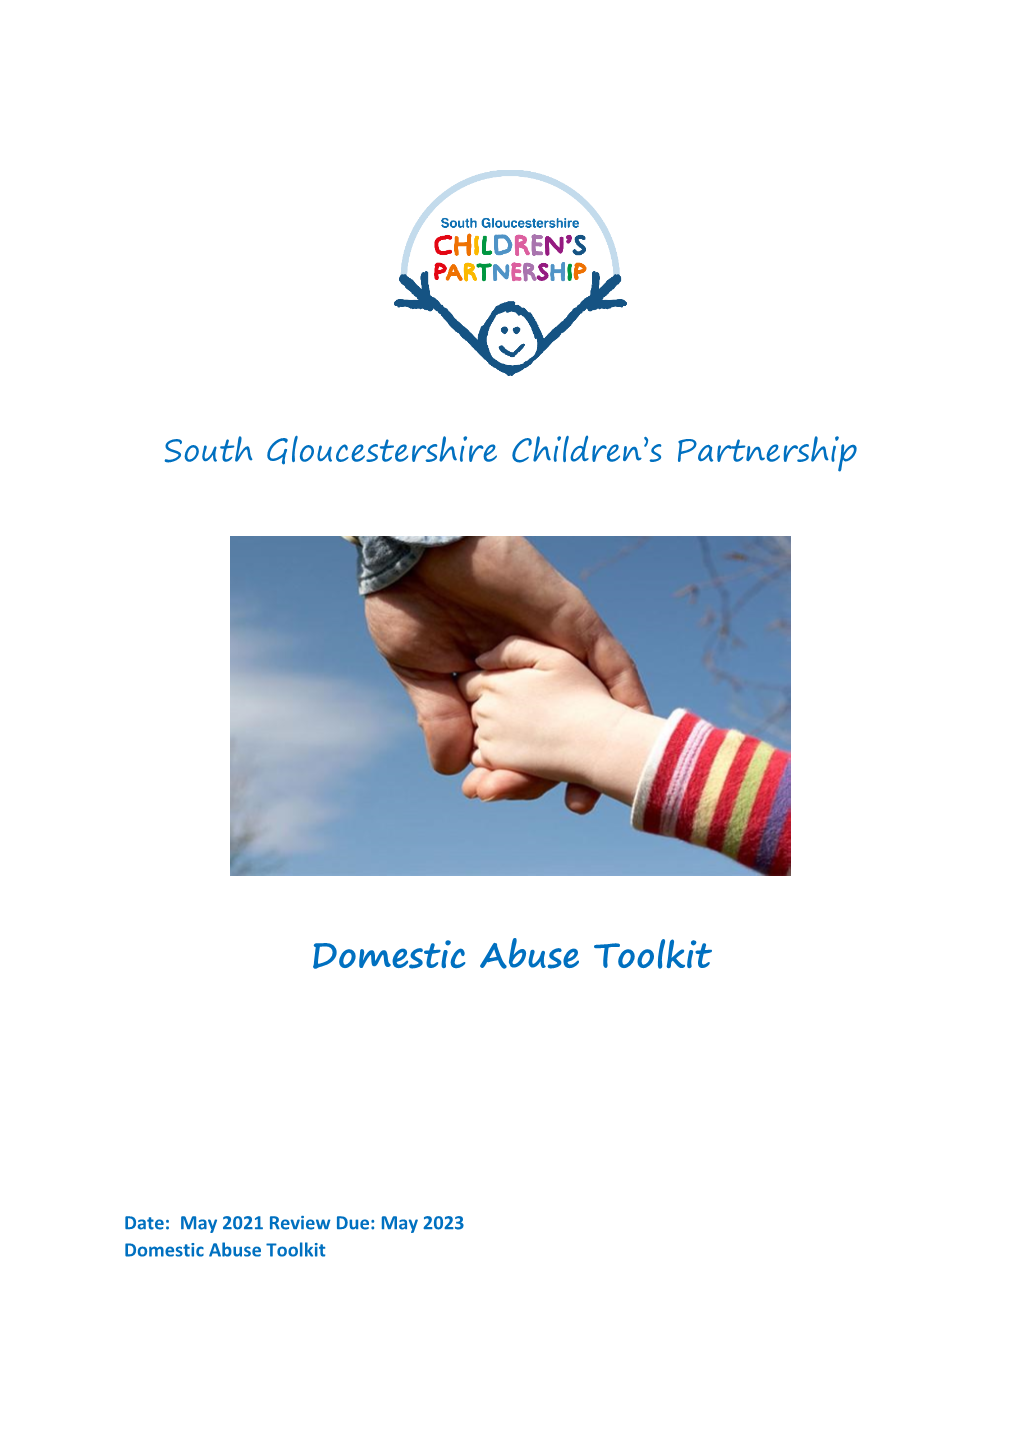 Domestic Abuse Toolkit May 2021